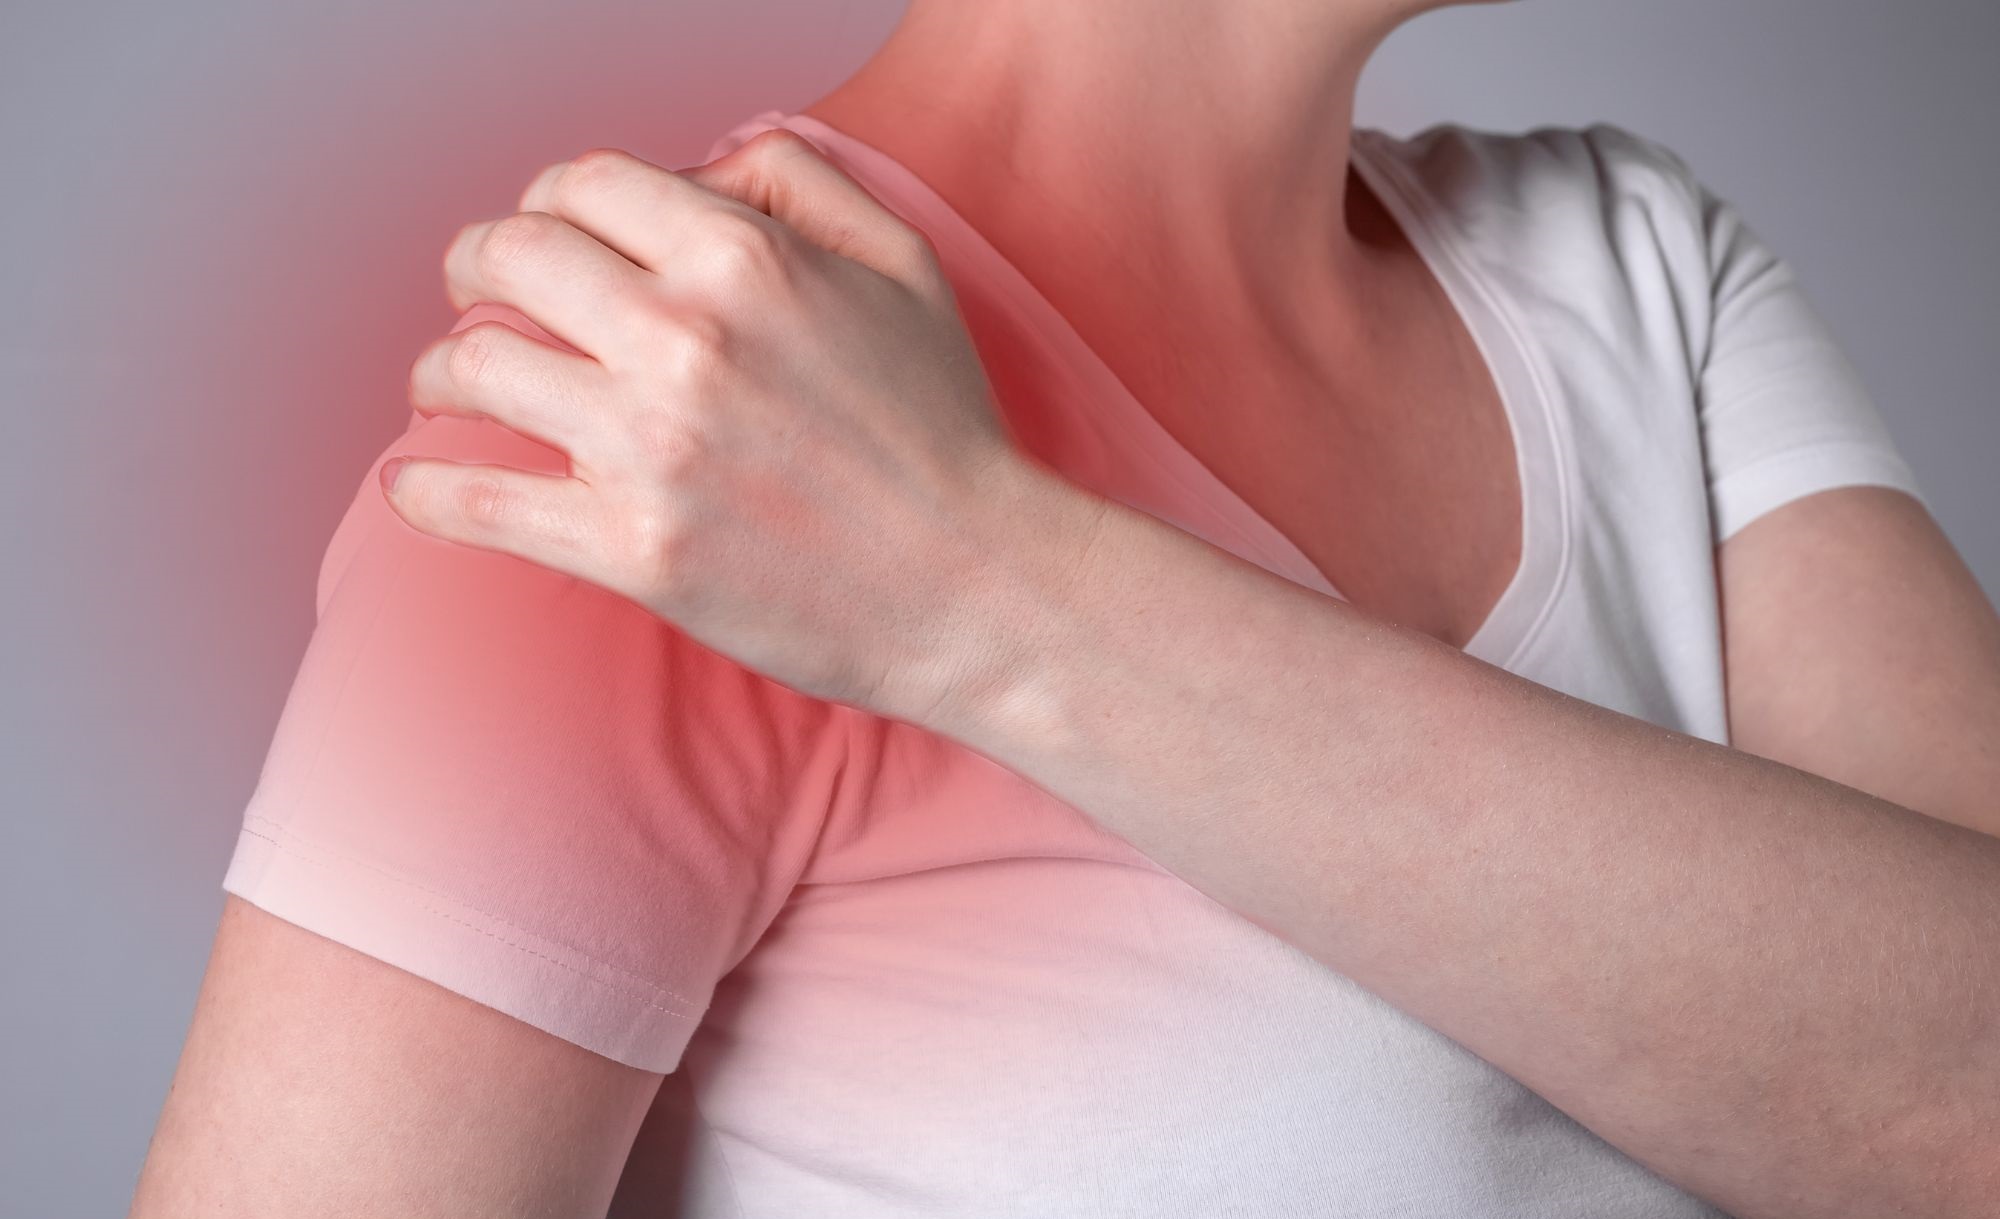 A woman suffering from shoulder pain.